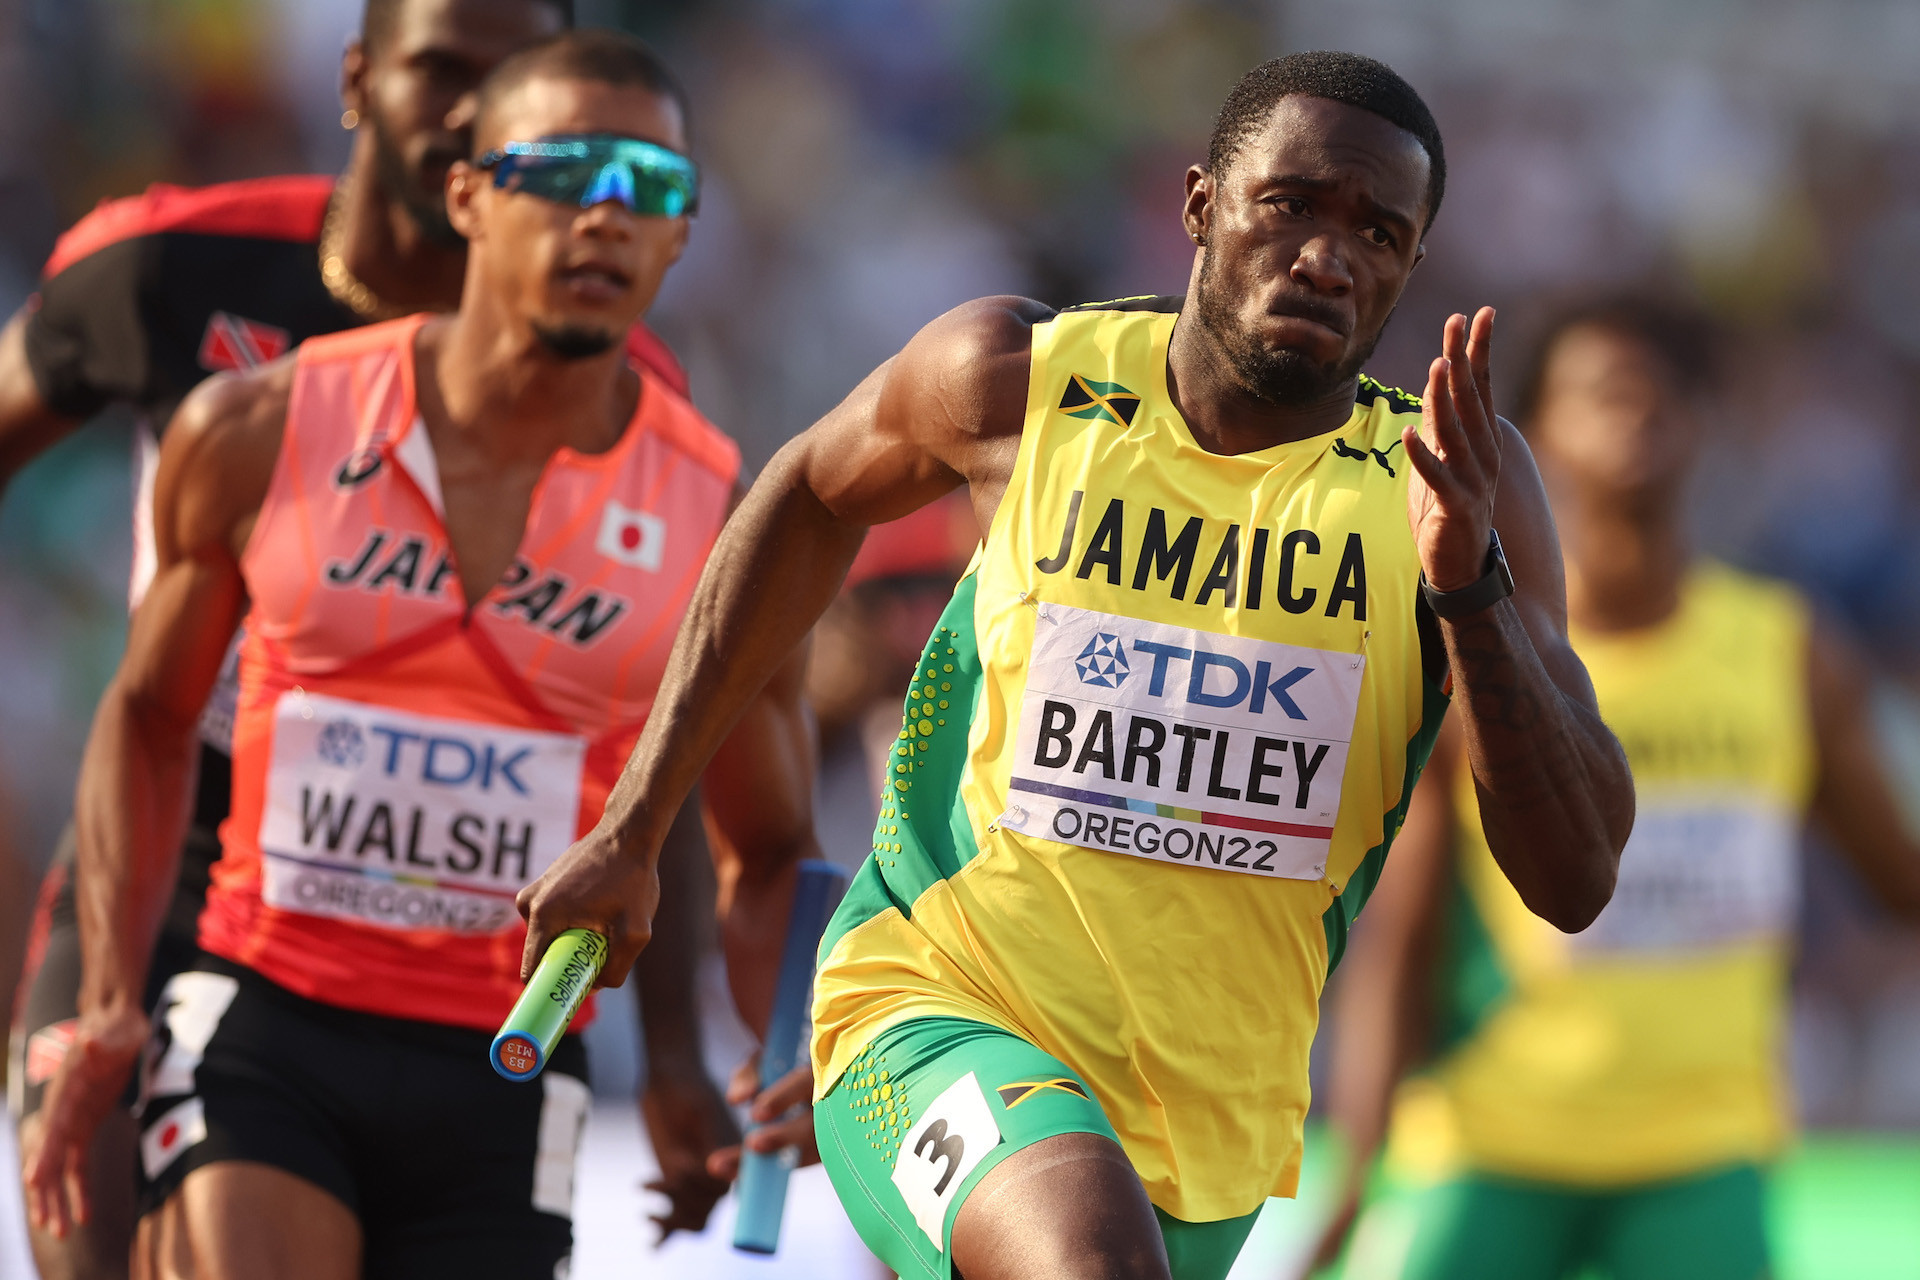 Karayme Bartley of Team Jamaica competes in the of the World Athletics Championships Oregon22. GETTY IMAGES